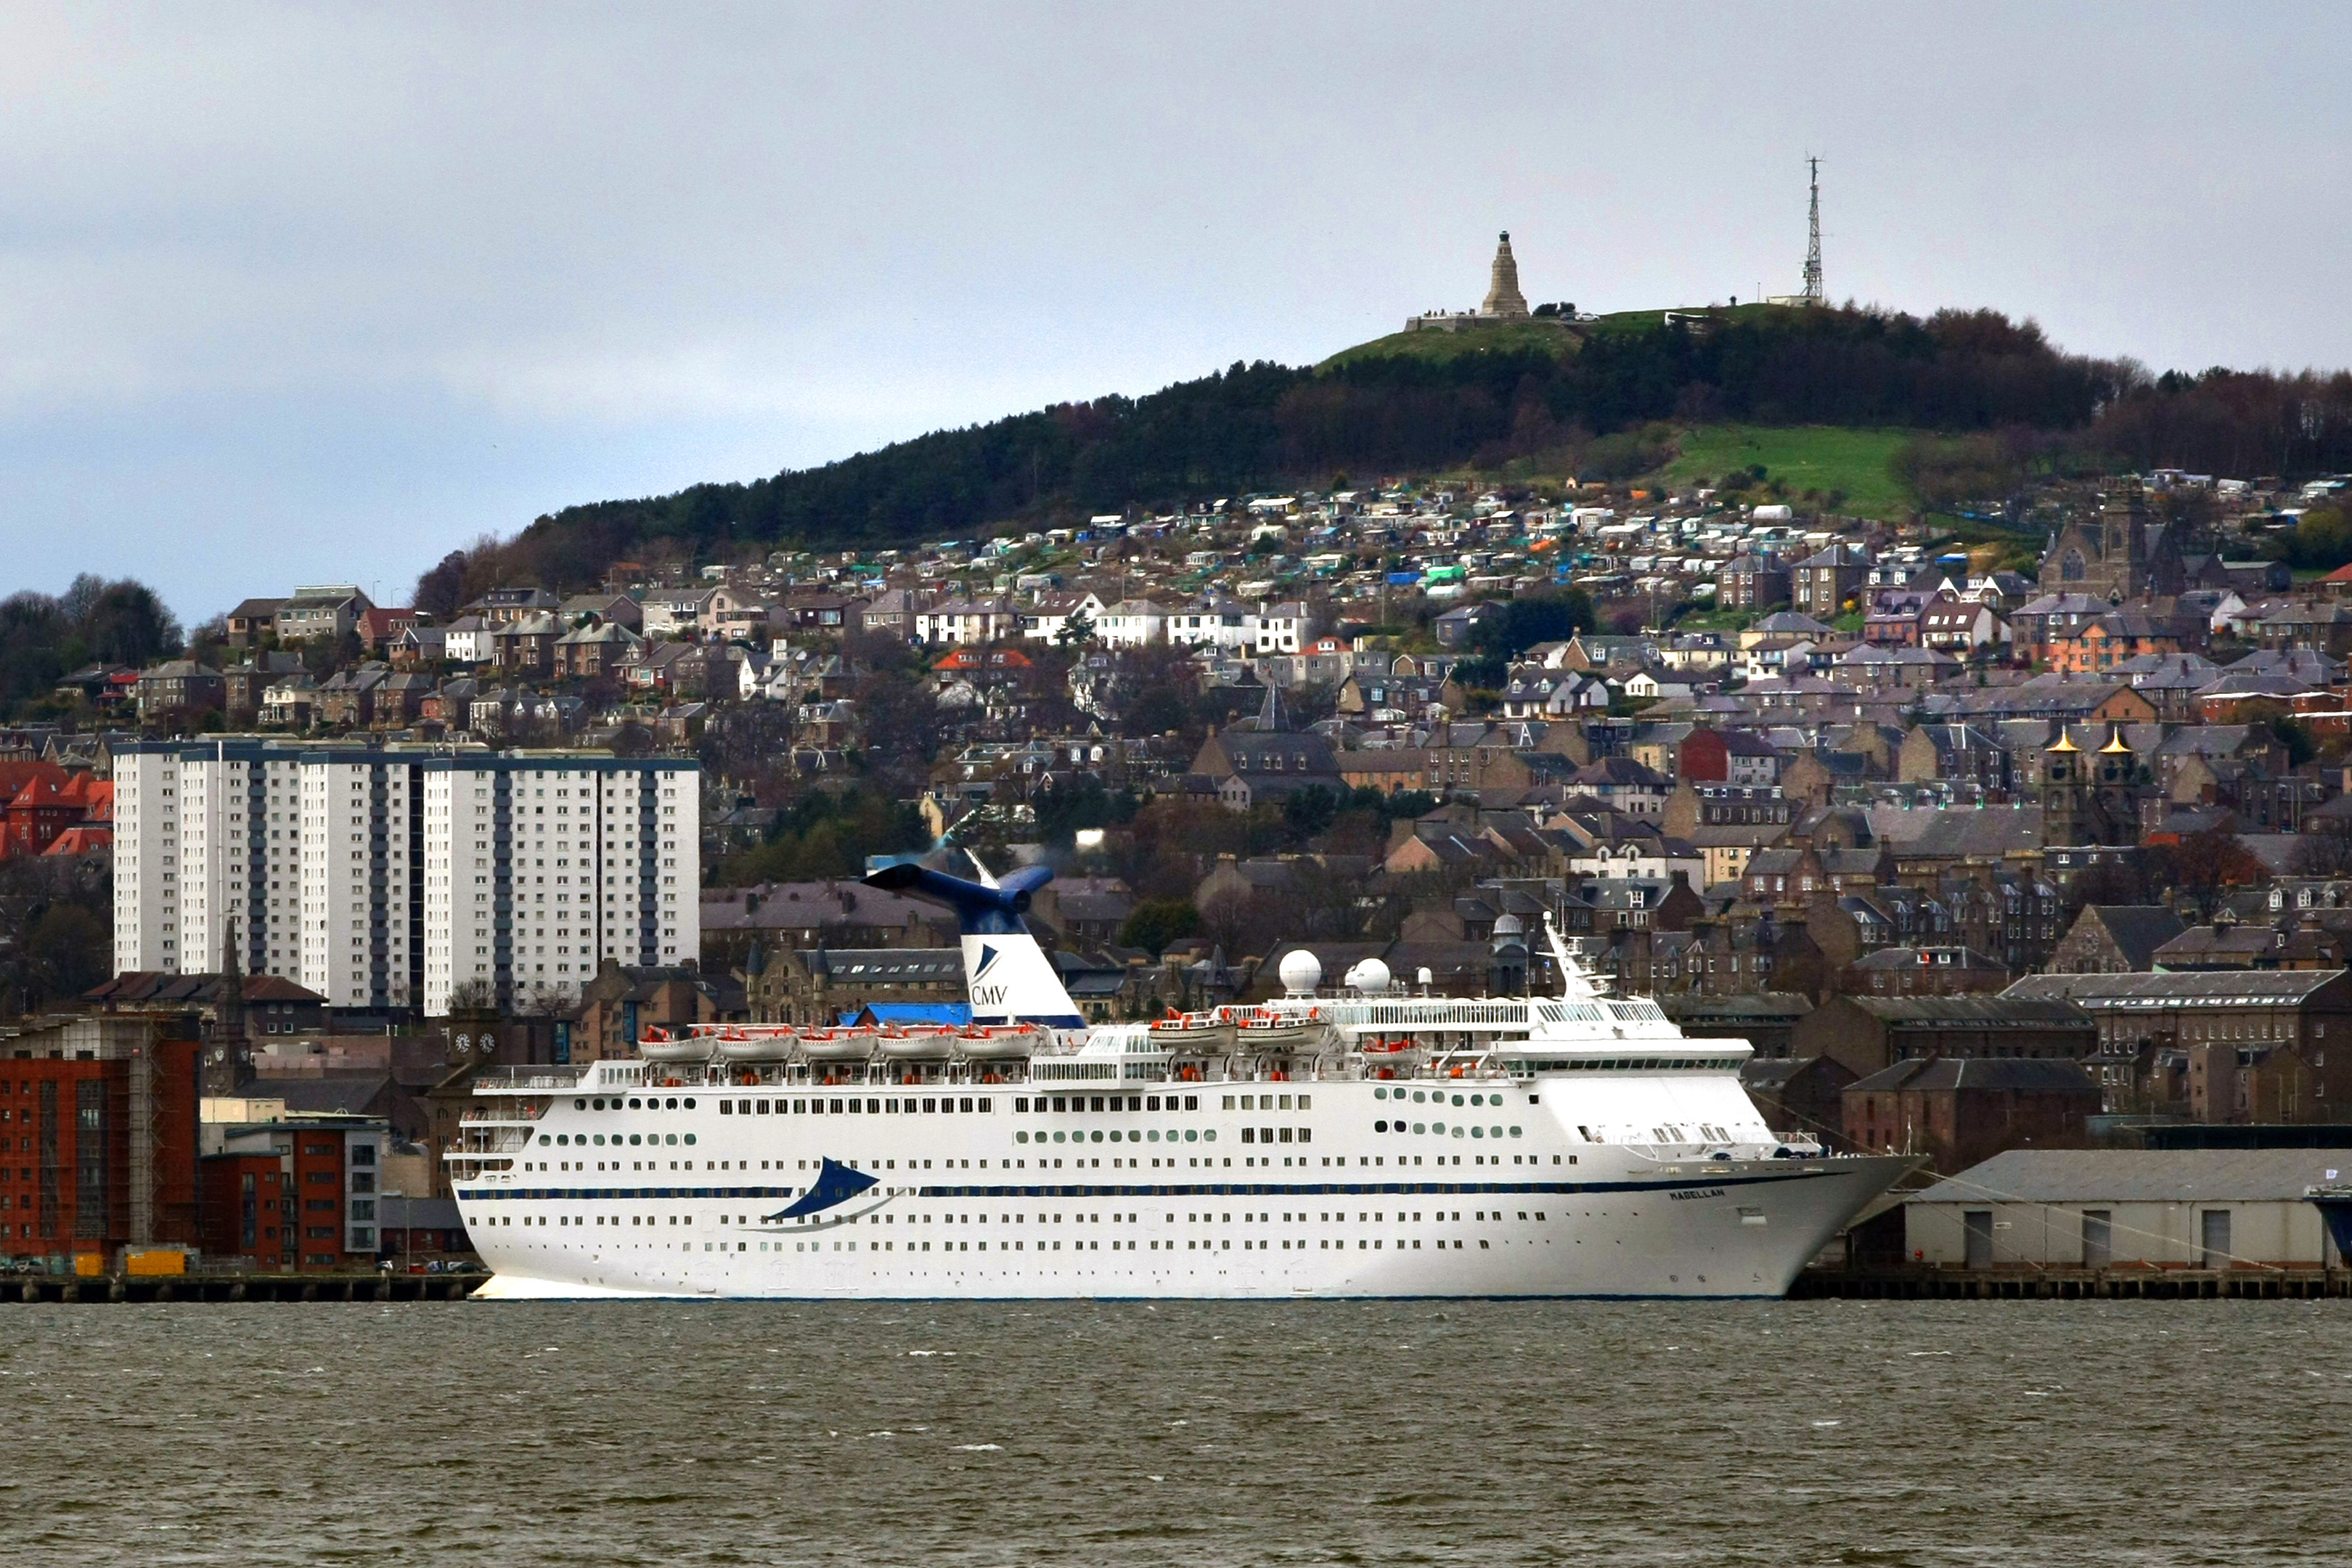 The cruise ship Magellan docked in Dundee in April 2018